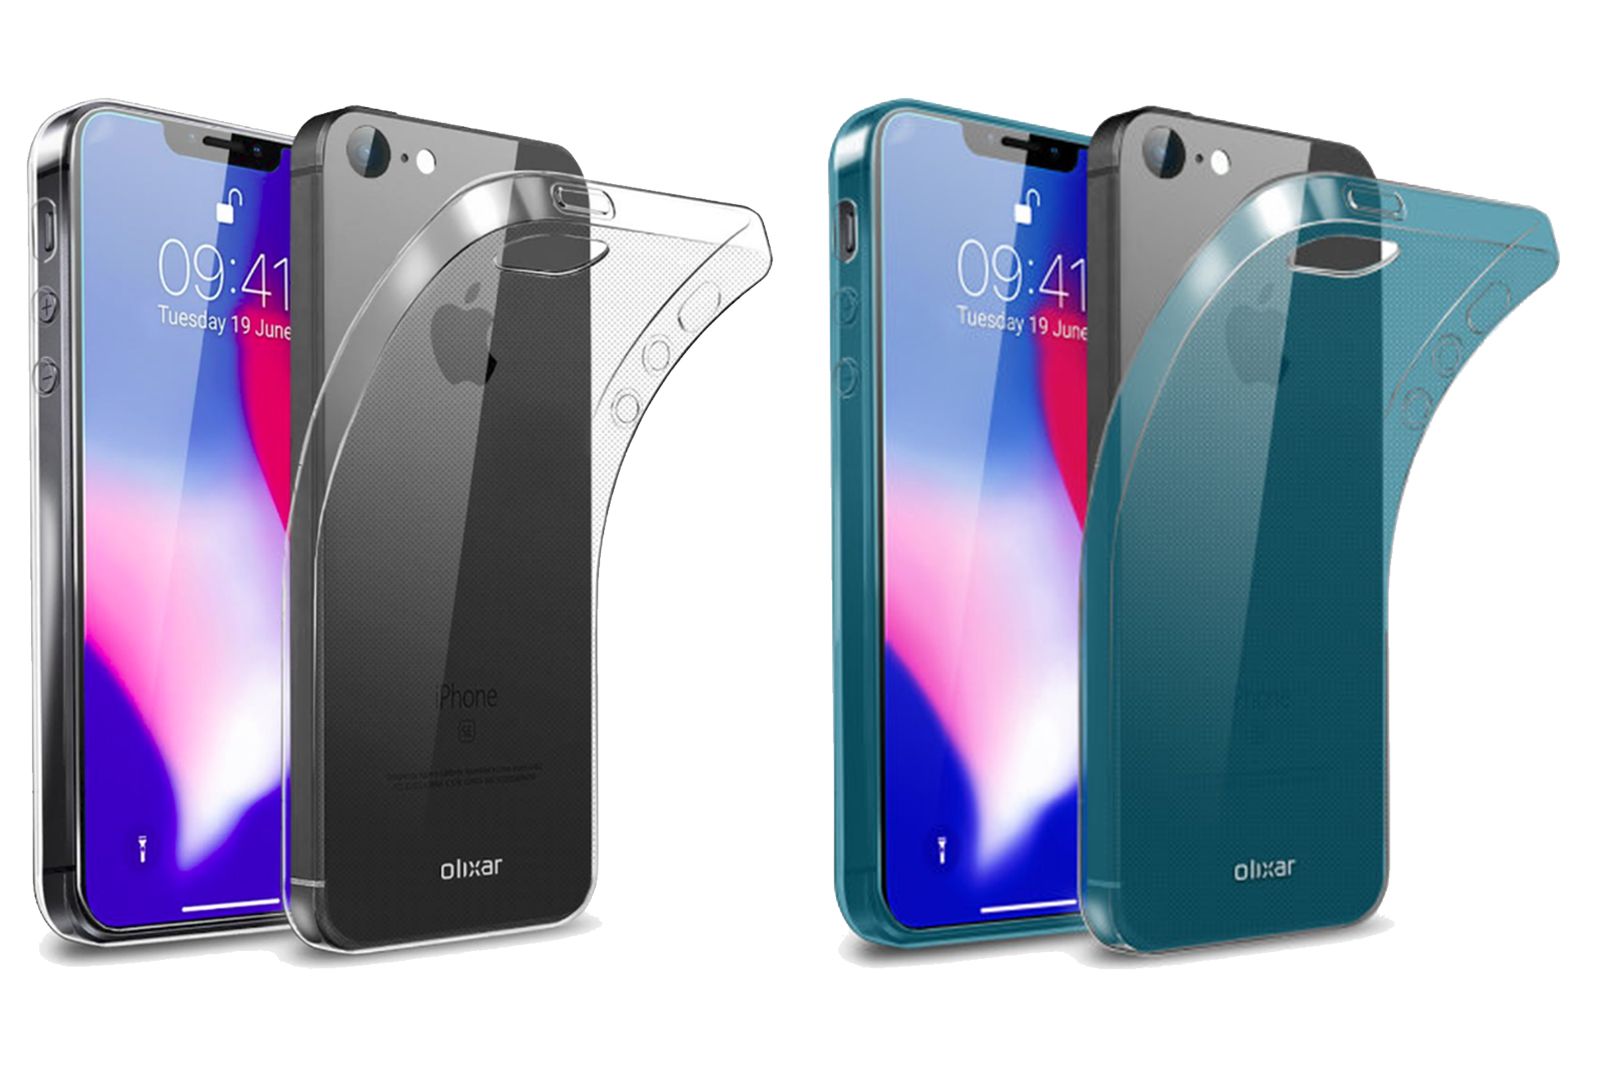 More case leaks show iPhone SE with notch and Face ID image 1